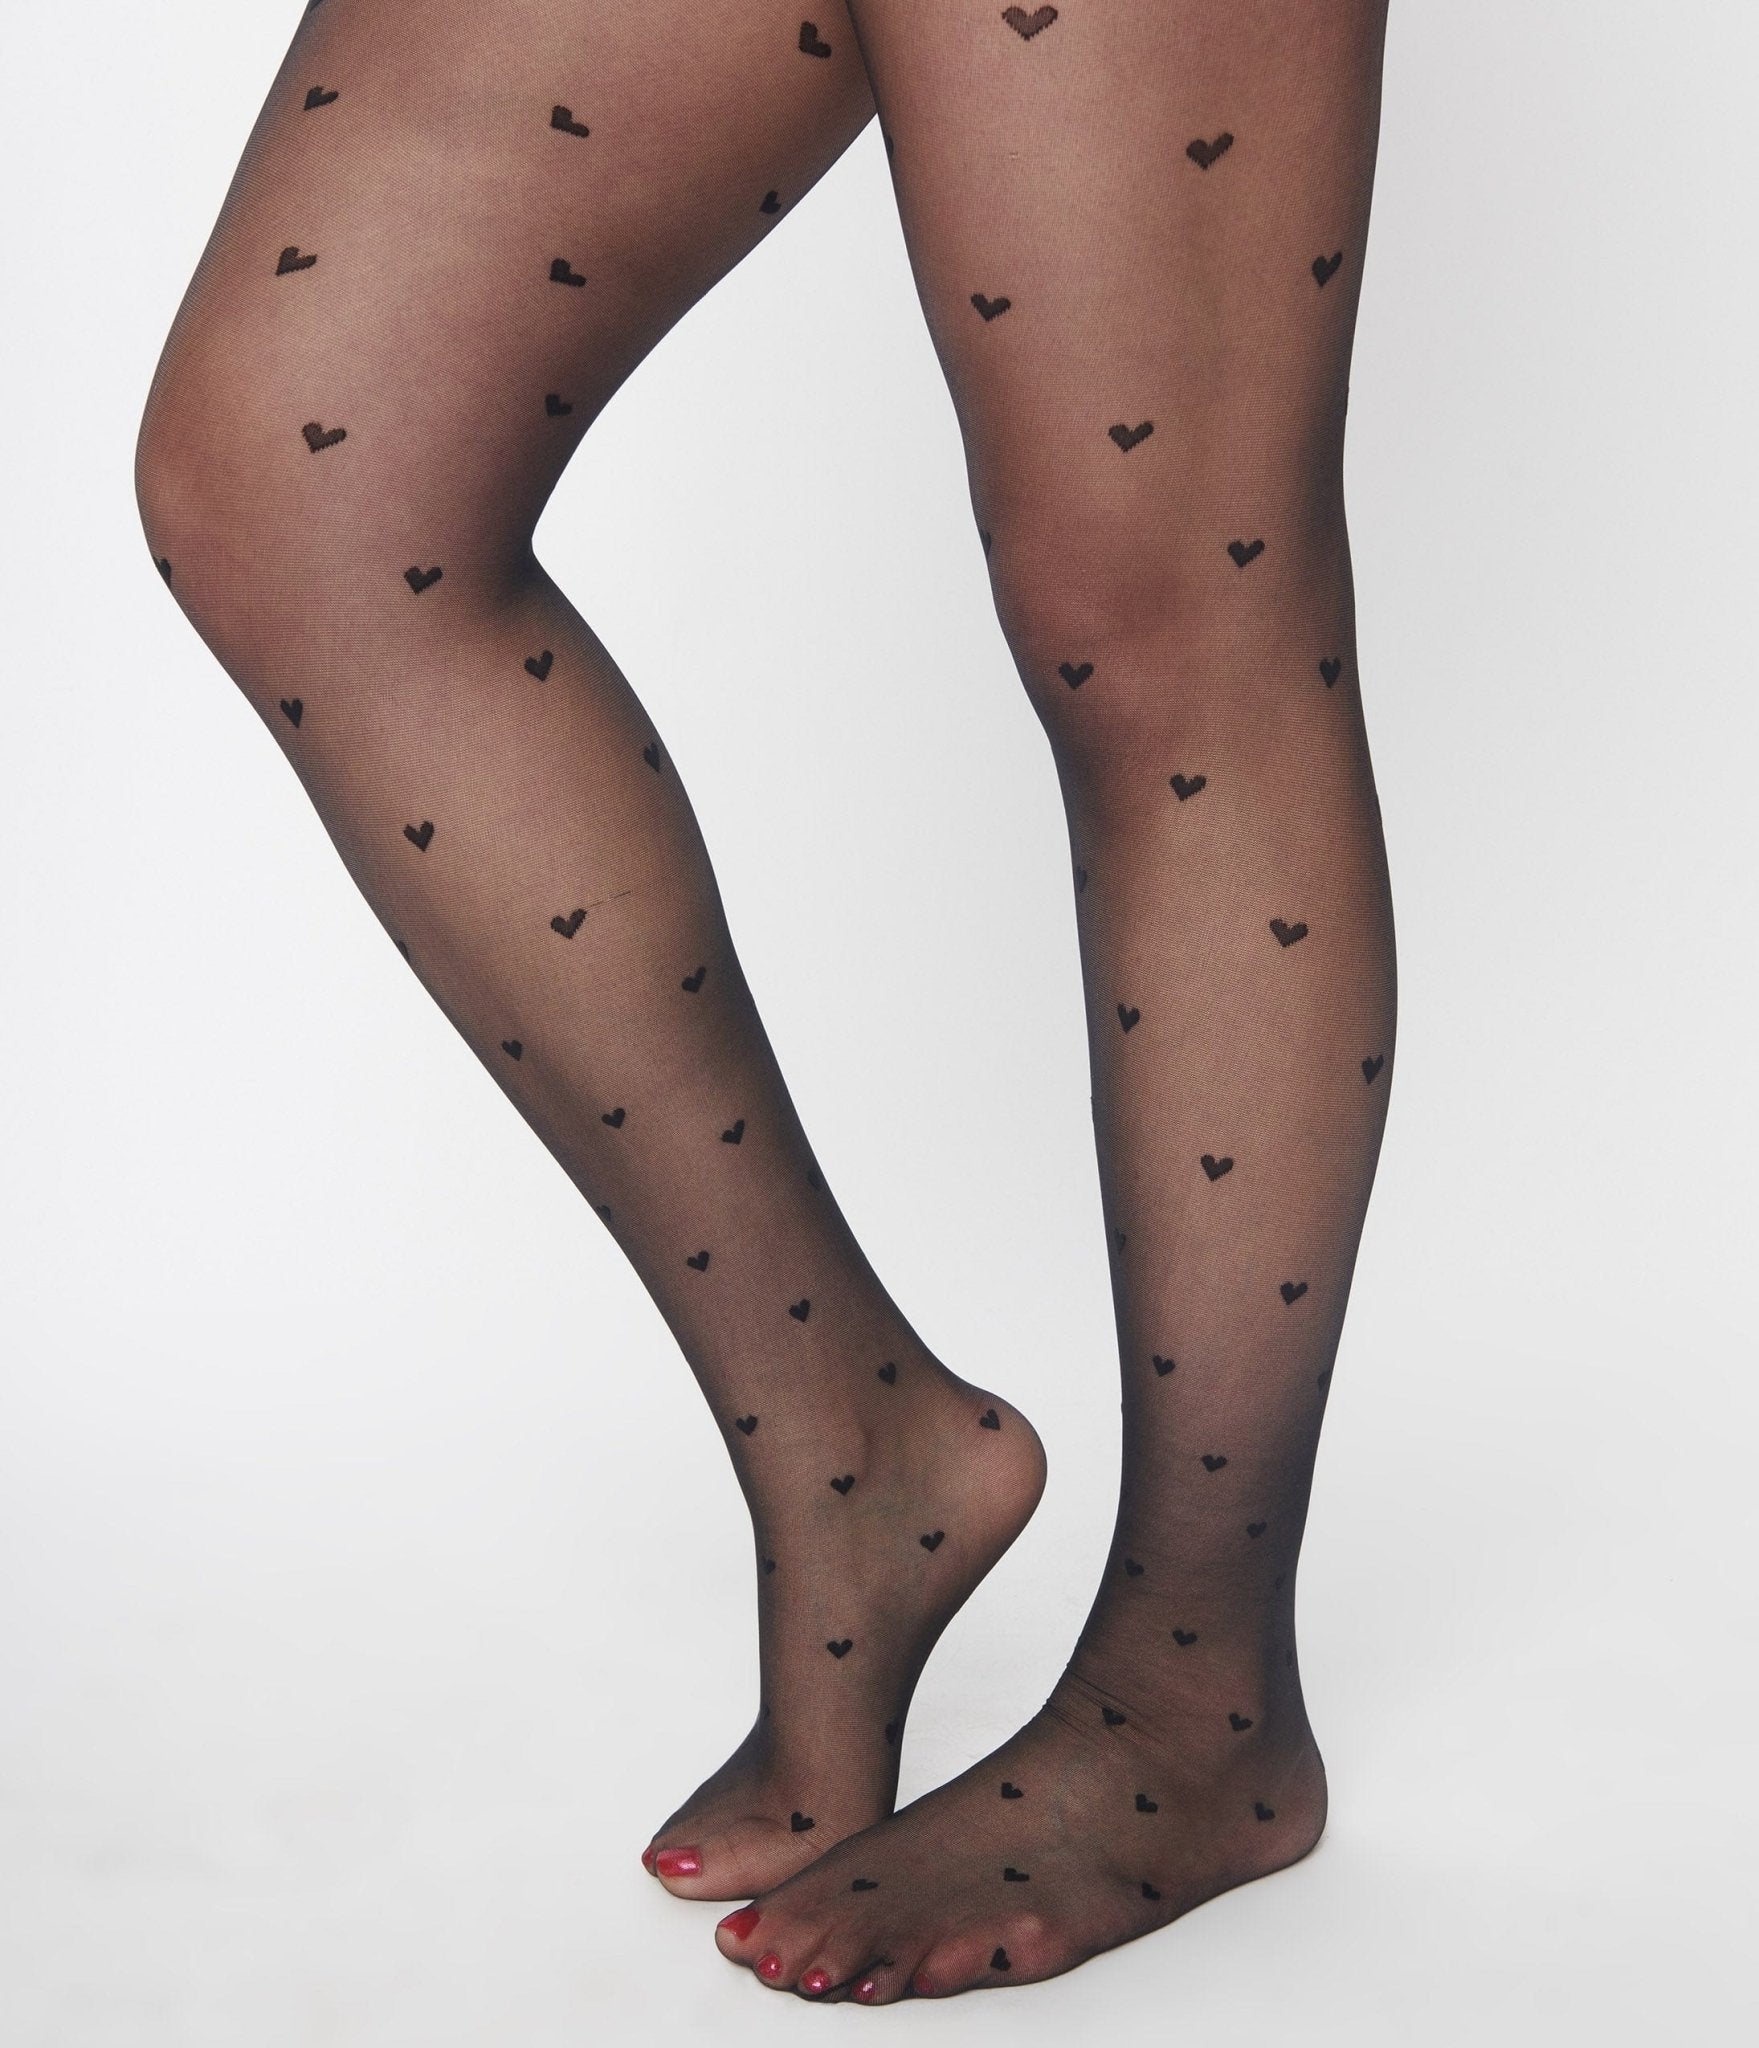 If you love our legwear, you can't miss - Calzedonia Malta